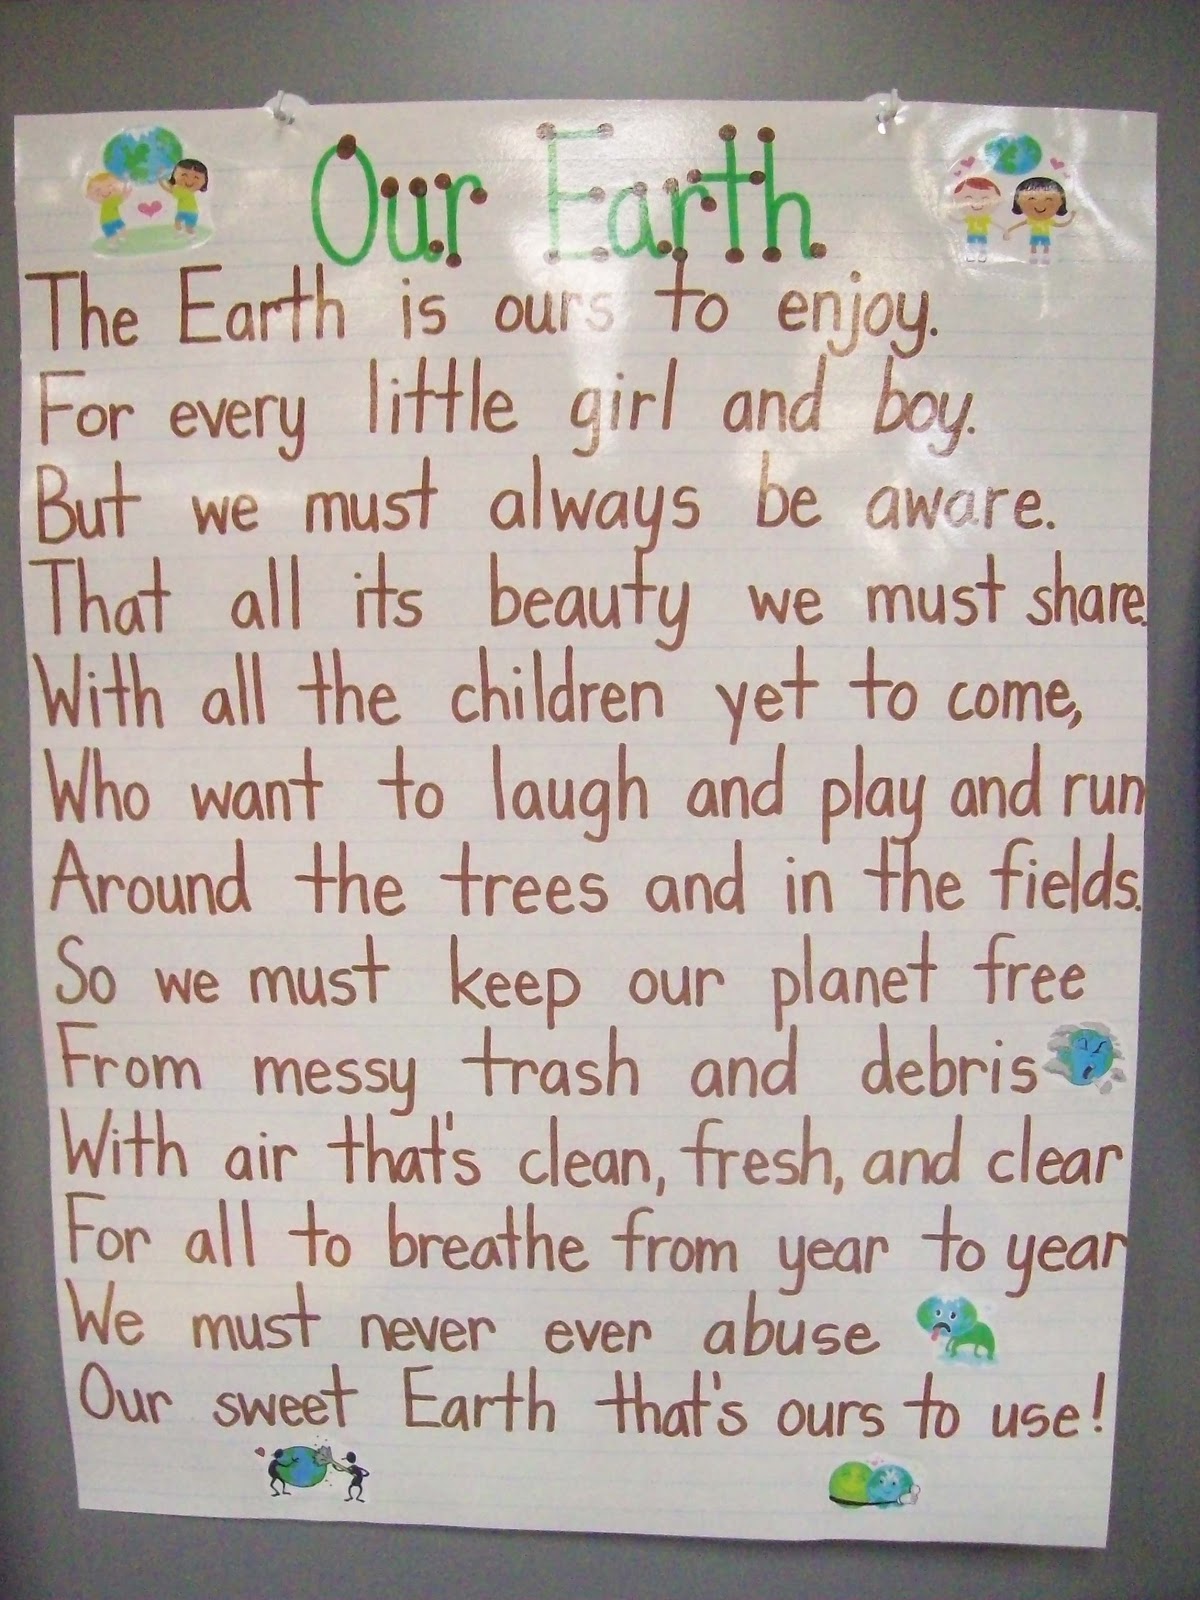 Save mother earth essay